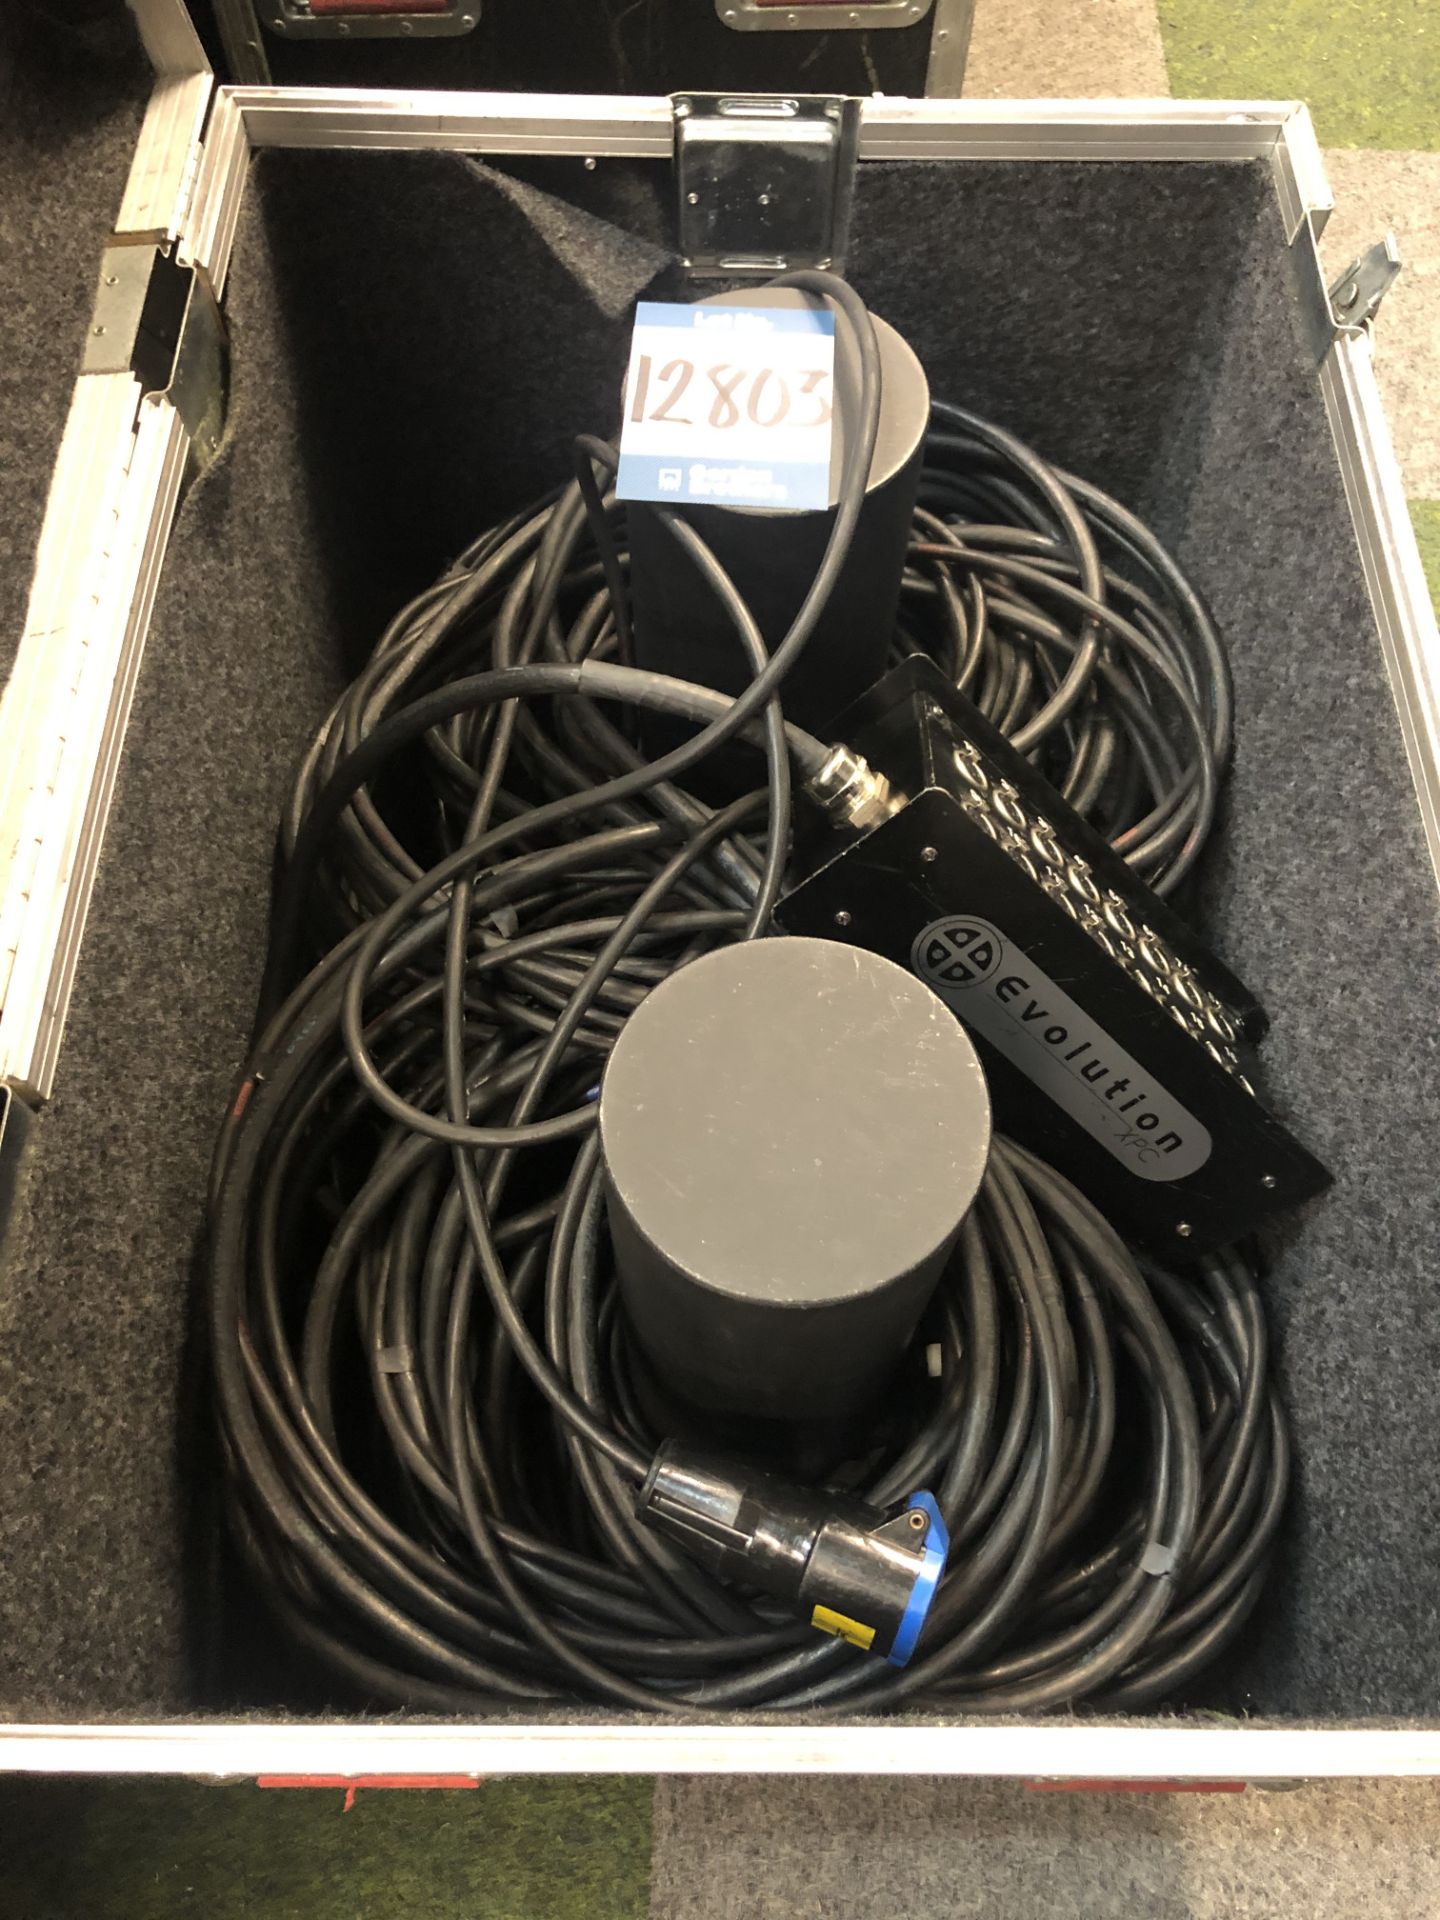 50m, 16 way multi-core cable in transit case